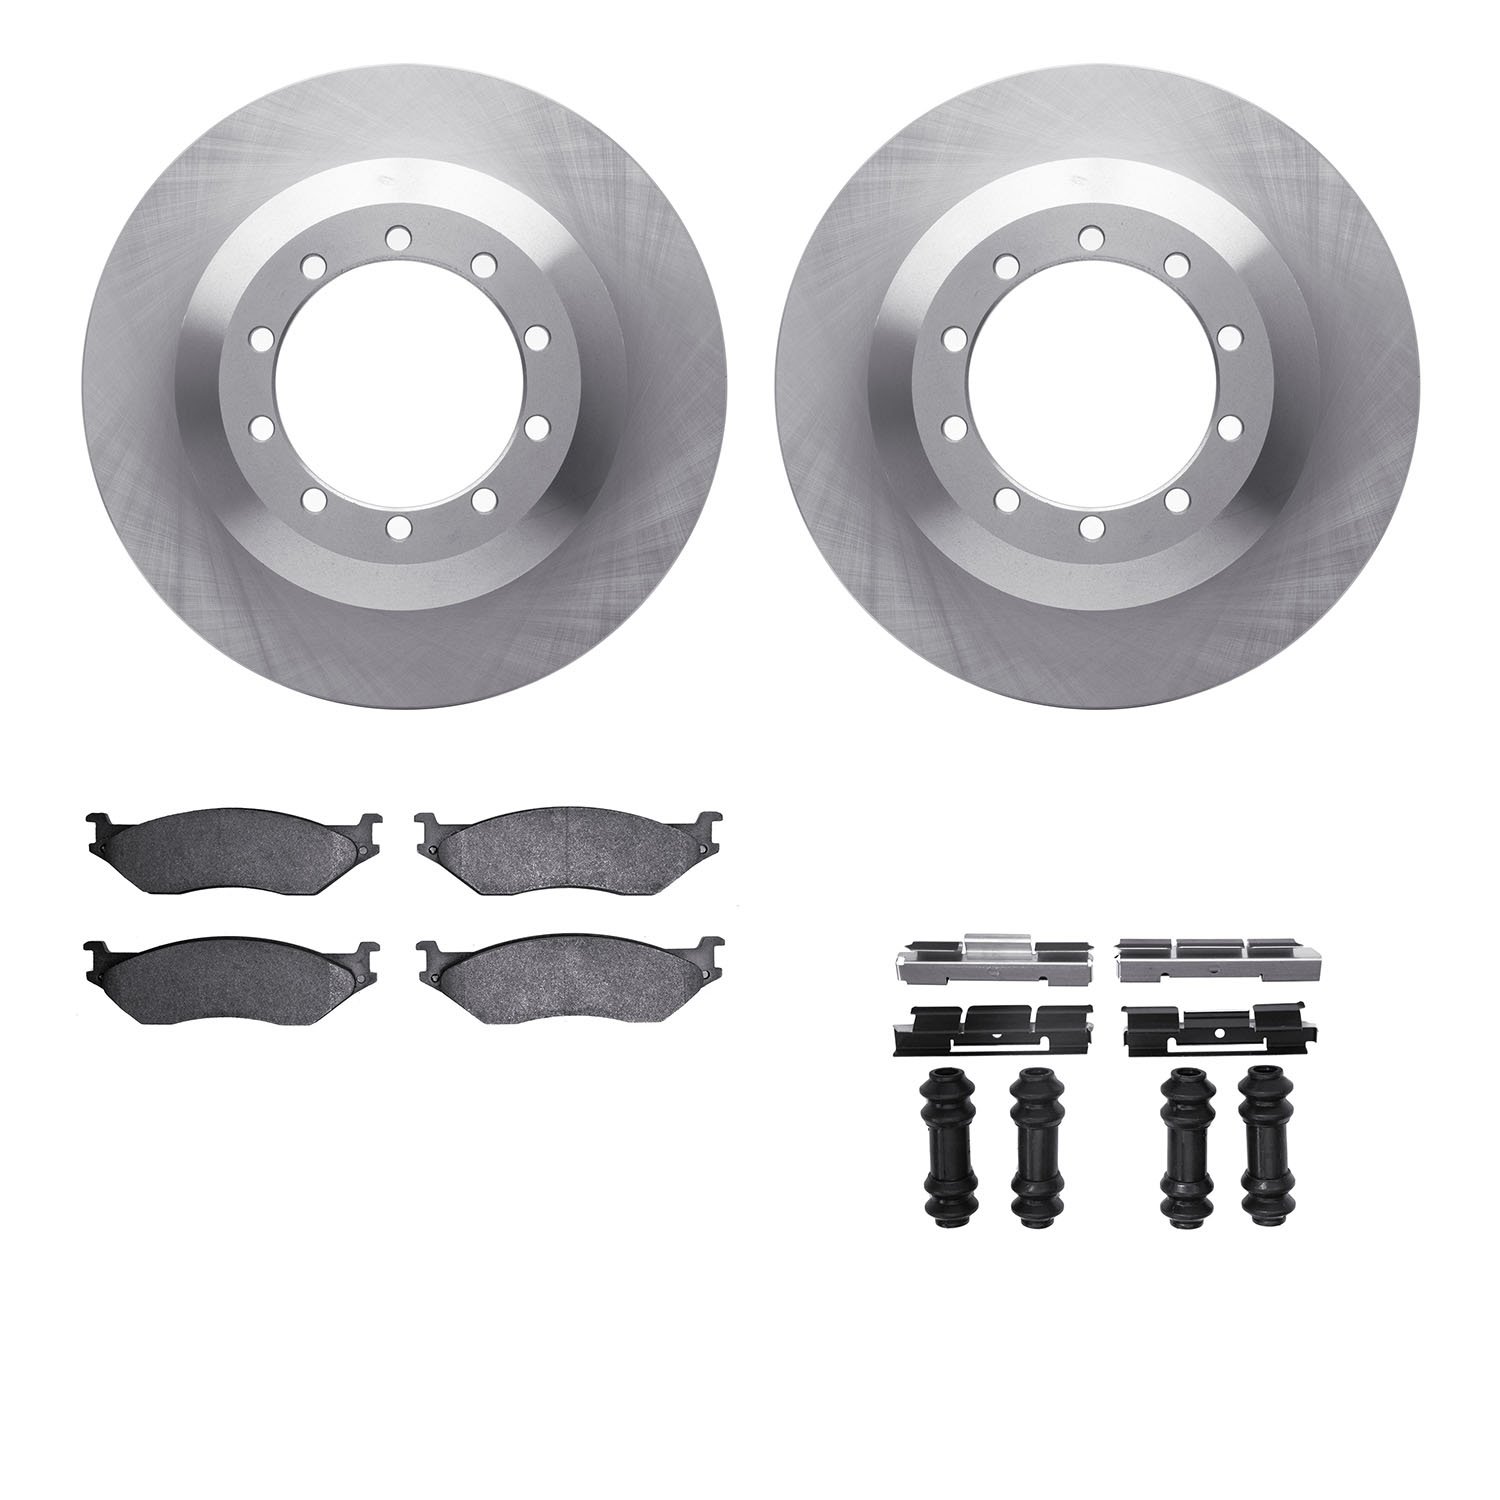 6412-54200 Brake Rotors with Ultimate-Duty Brake Pads Kit & Hardware, 1999-2009 Ford/Lincoln/Mercury/Mazda, Position: Rear